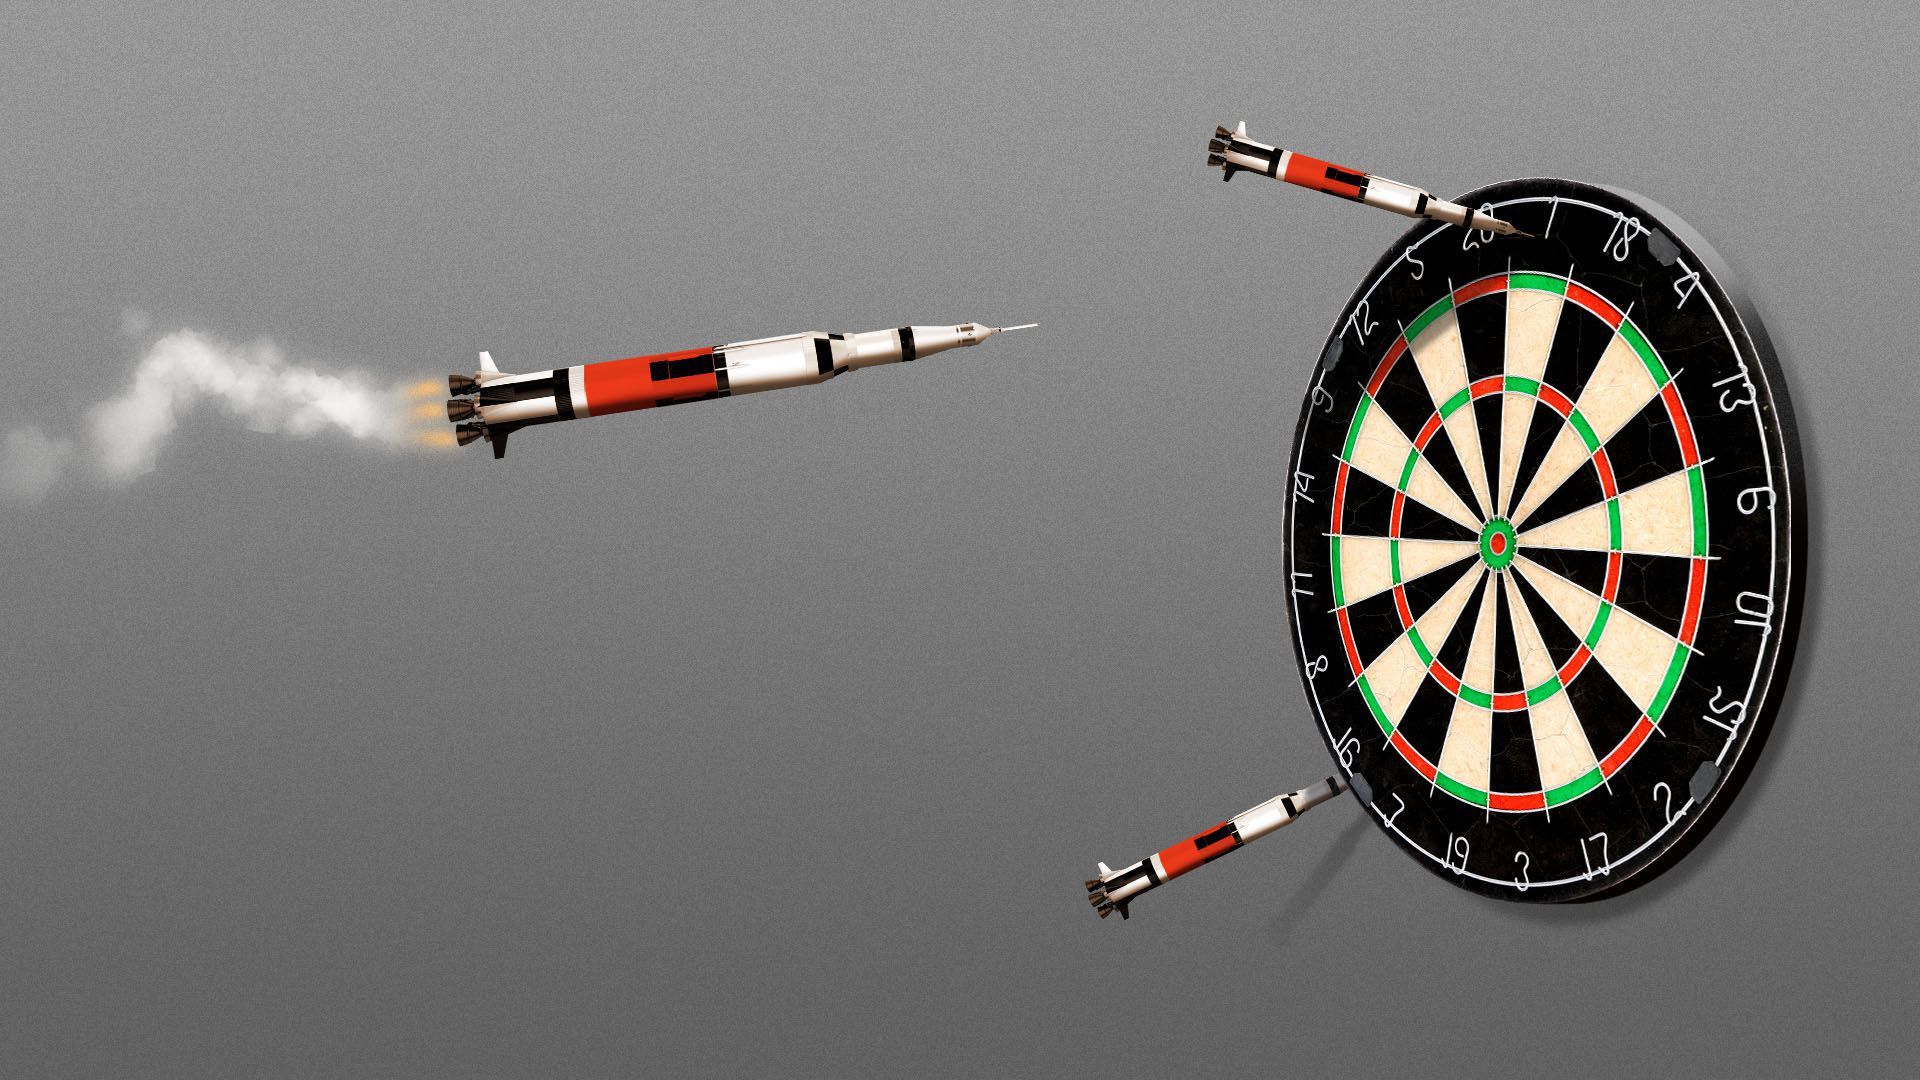 Illustration of a dart board and rockets. 